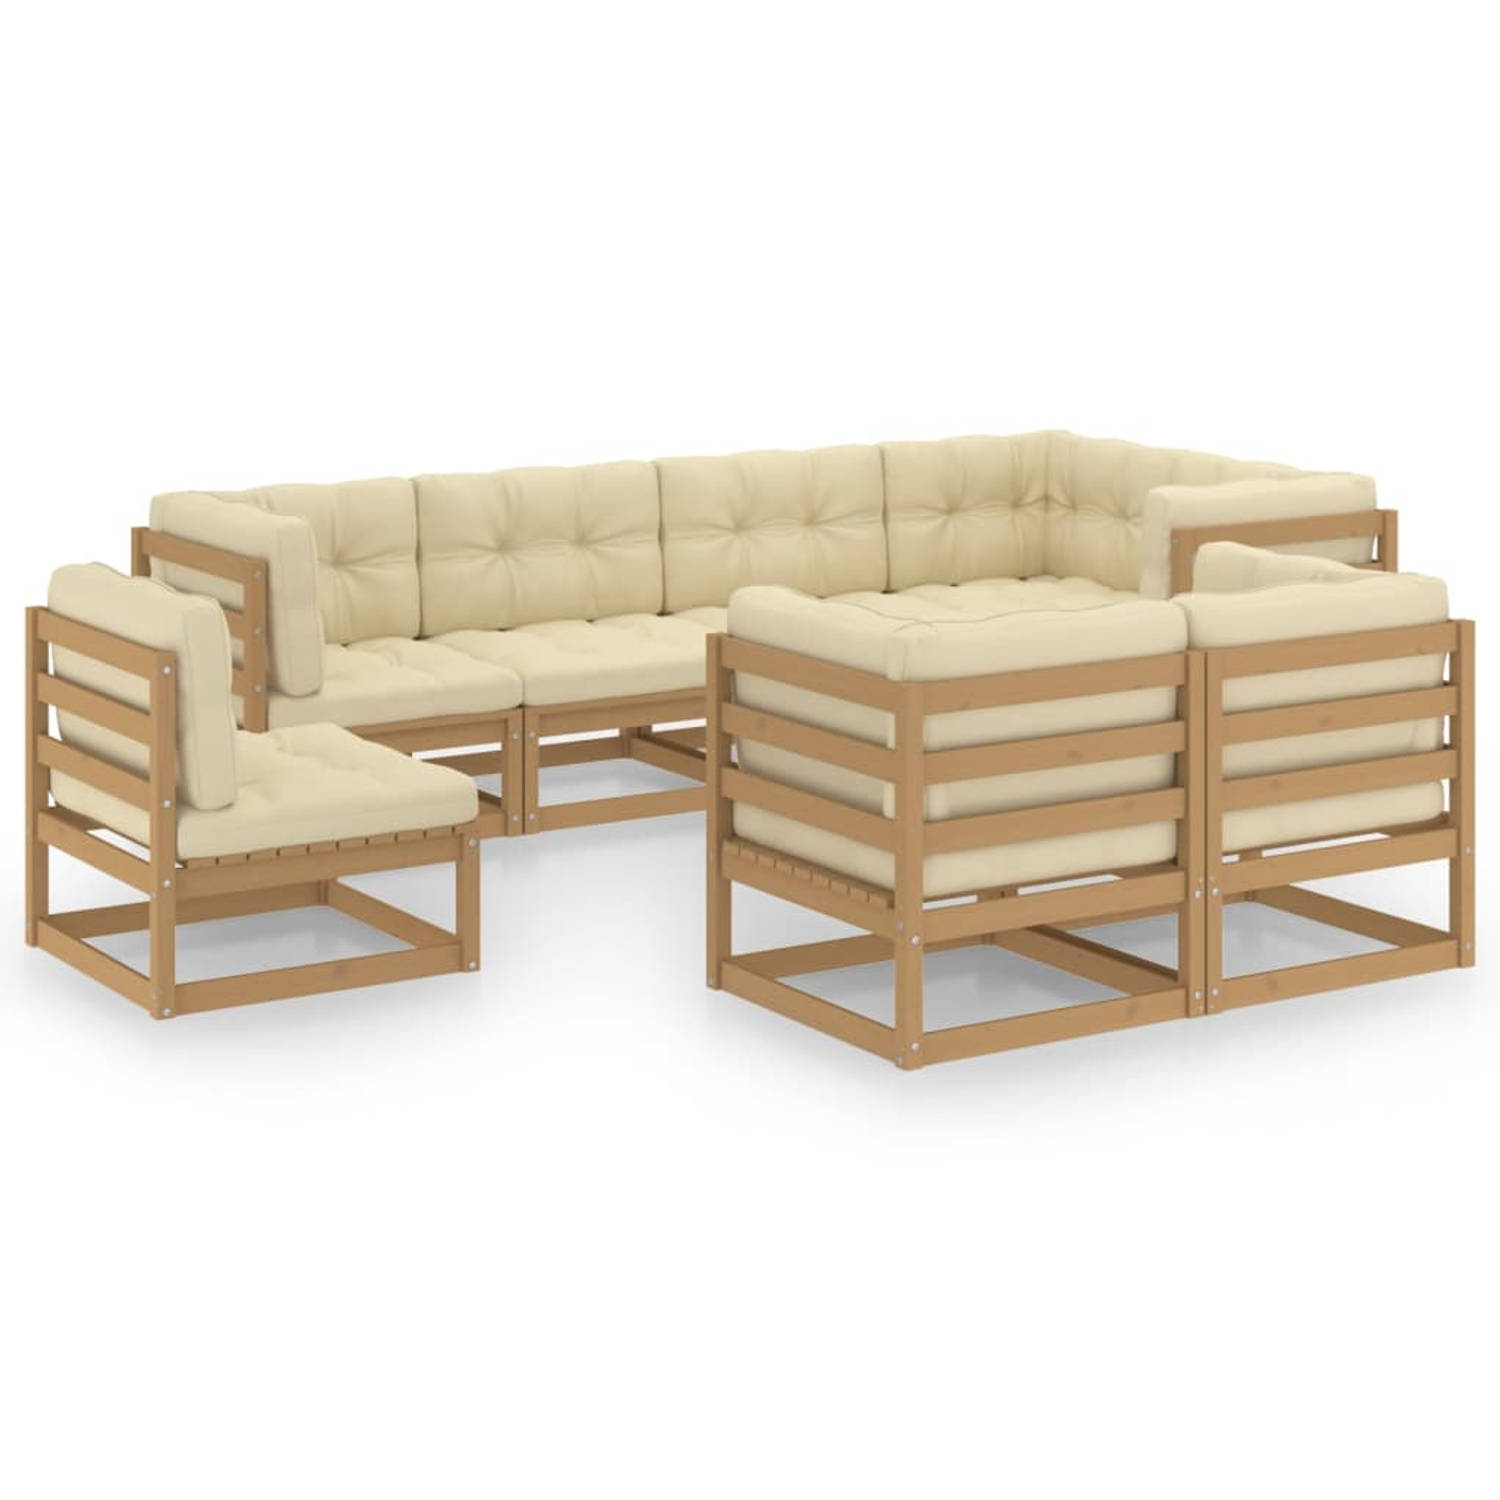 The Living Store Loungeset Massief Grenenhout - Modulair - Honingbruin - 70x70x67cm - Inclusief Kussens